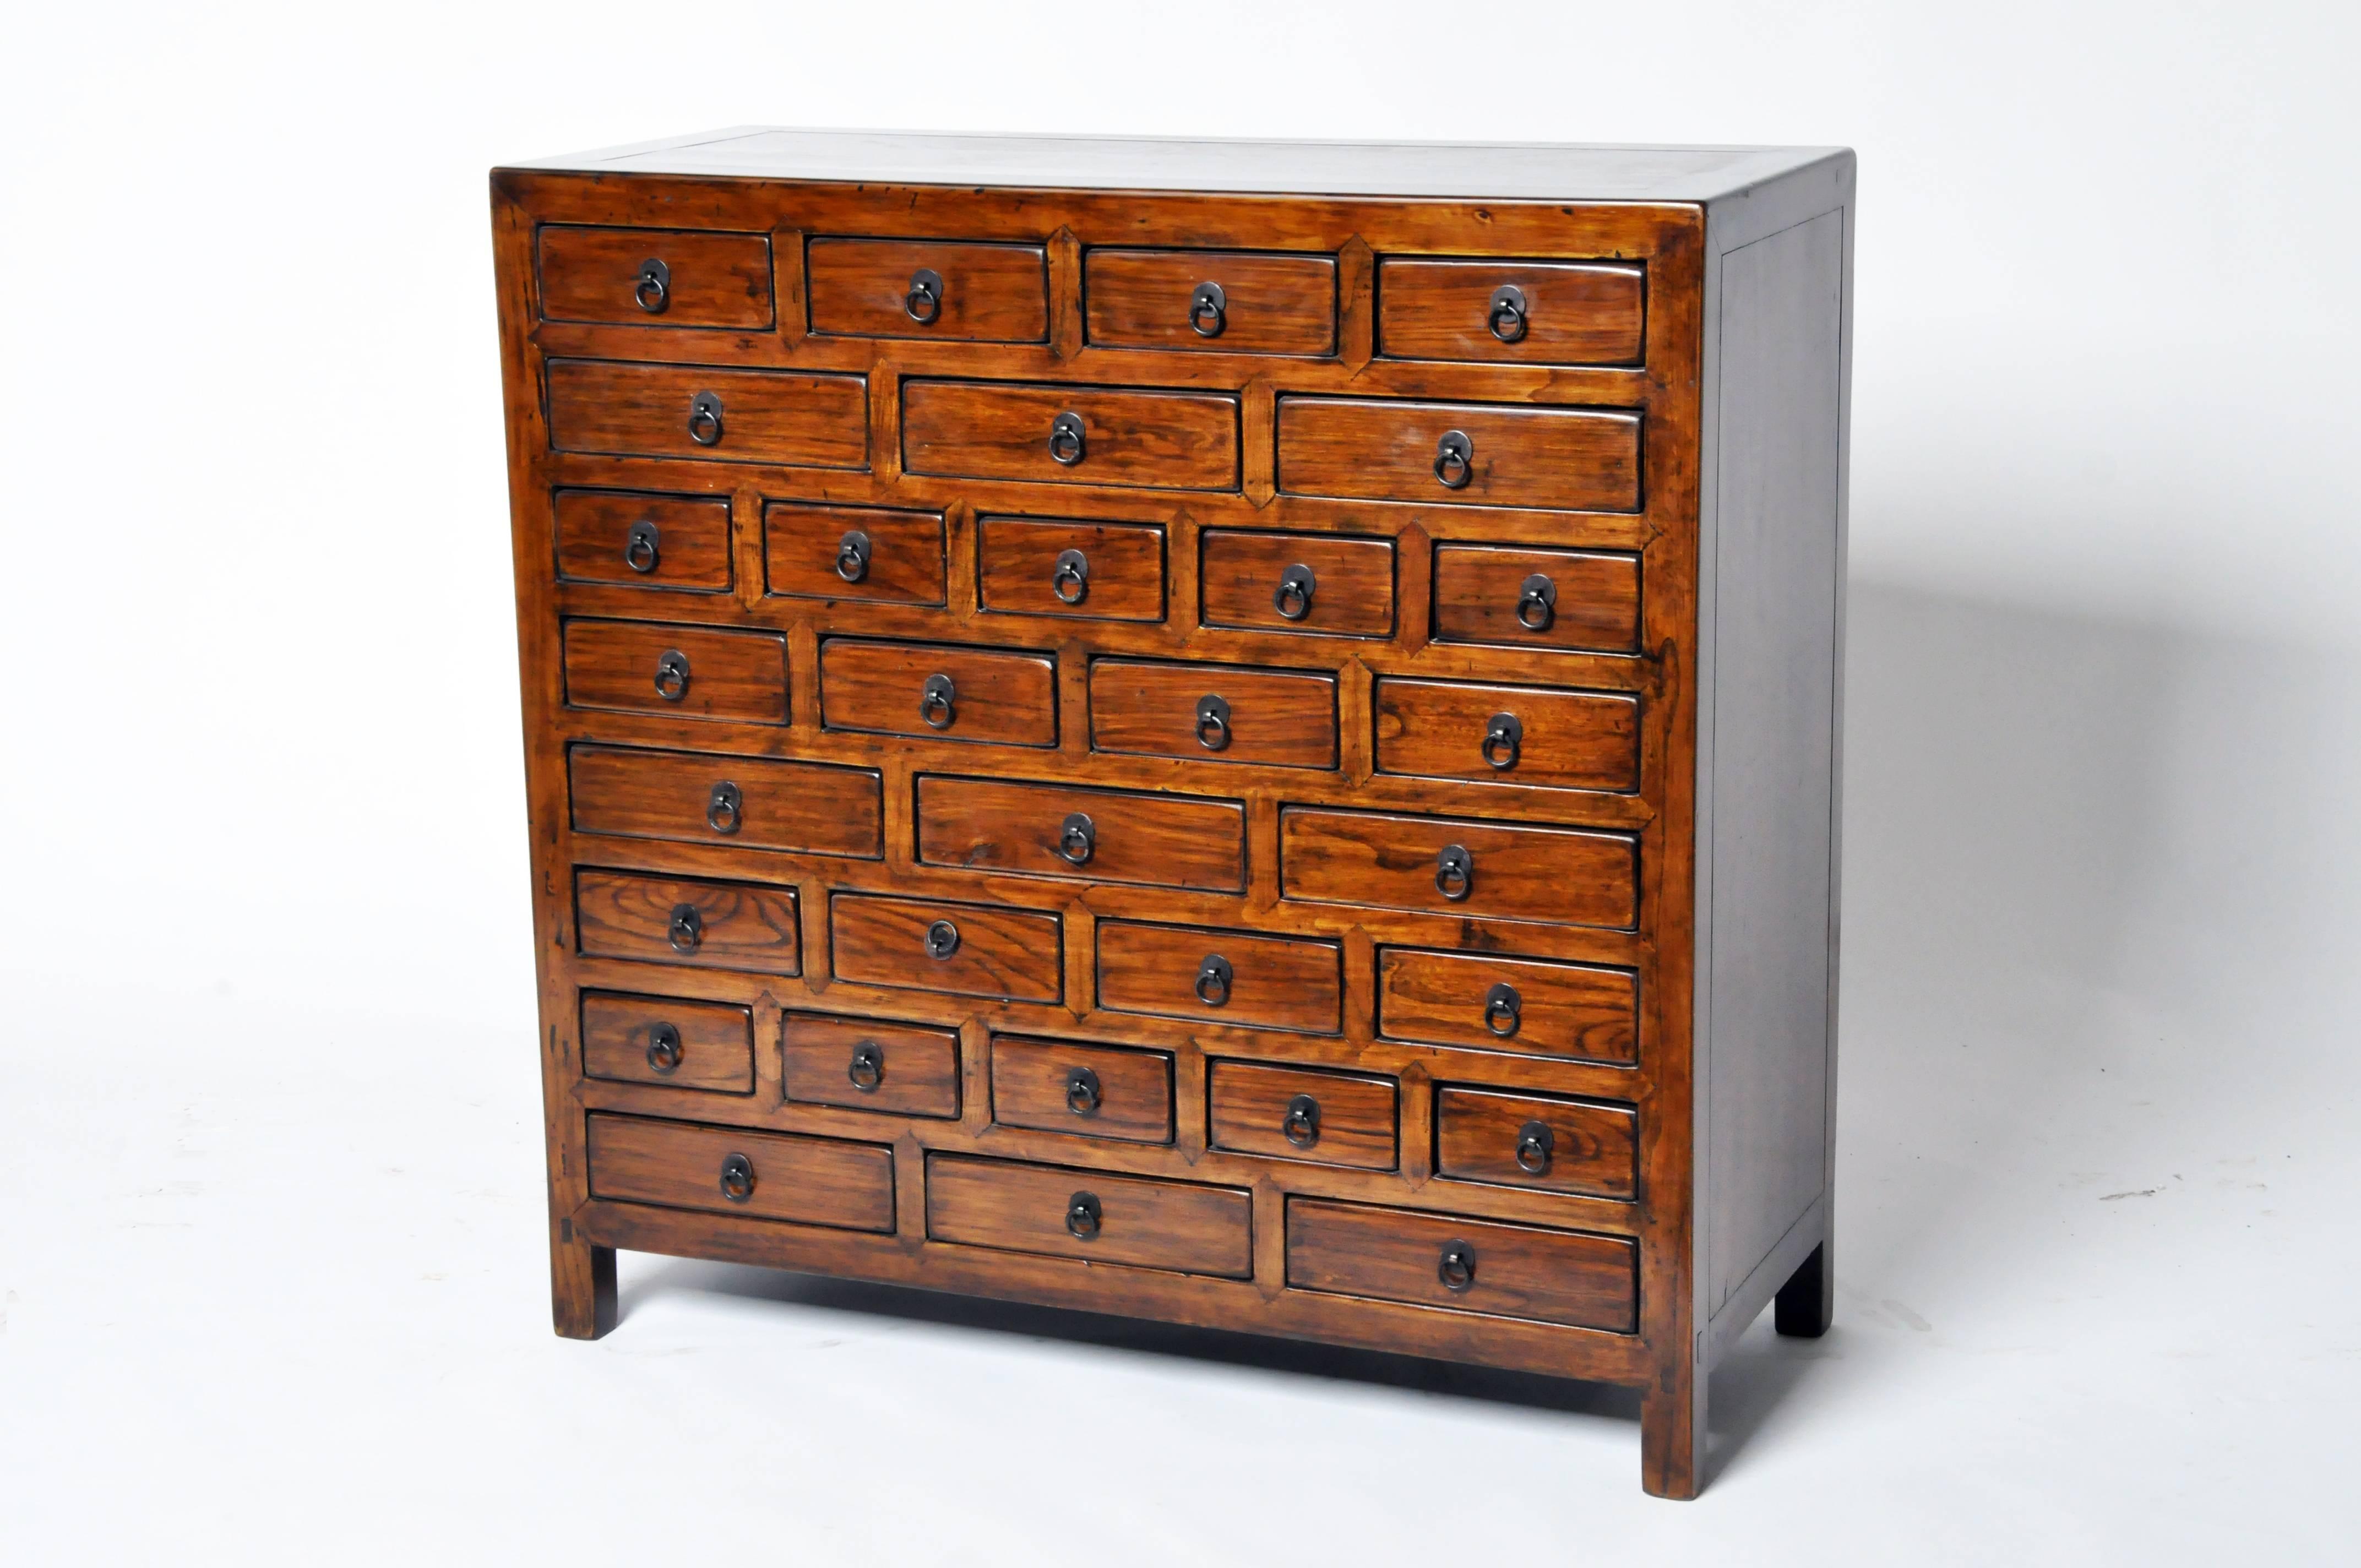 This letter cabinet was systematically designed to keep documents and writing implements such as paper, stationary, pens, brushes, inks, wax and seal presses organized. 31 drawers in three different sizes provide ample and efficient storage space.